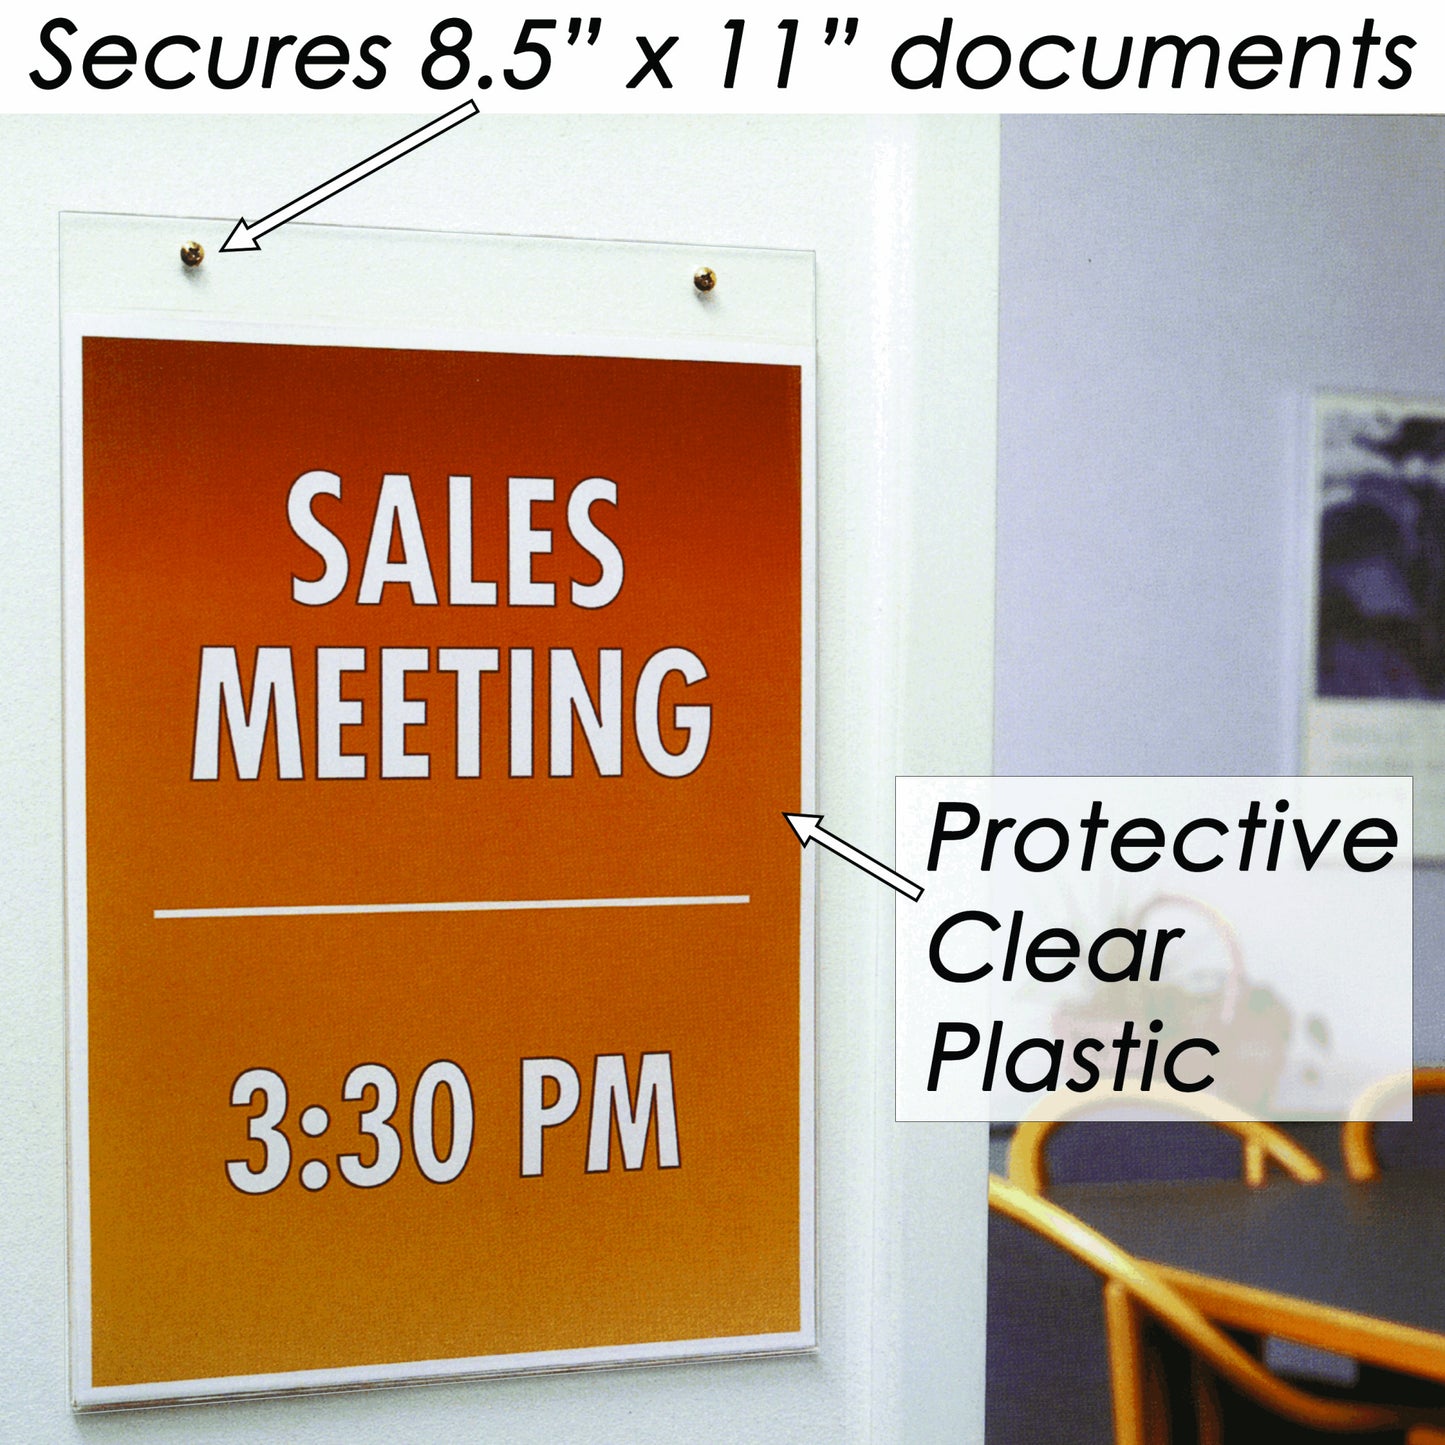 Portrait Wall Mount Clear Plastic Sign Holder 8.5" x 11"